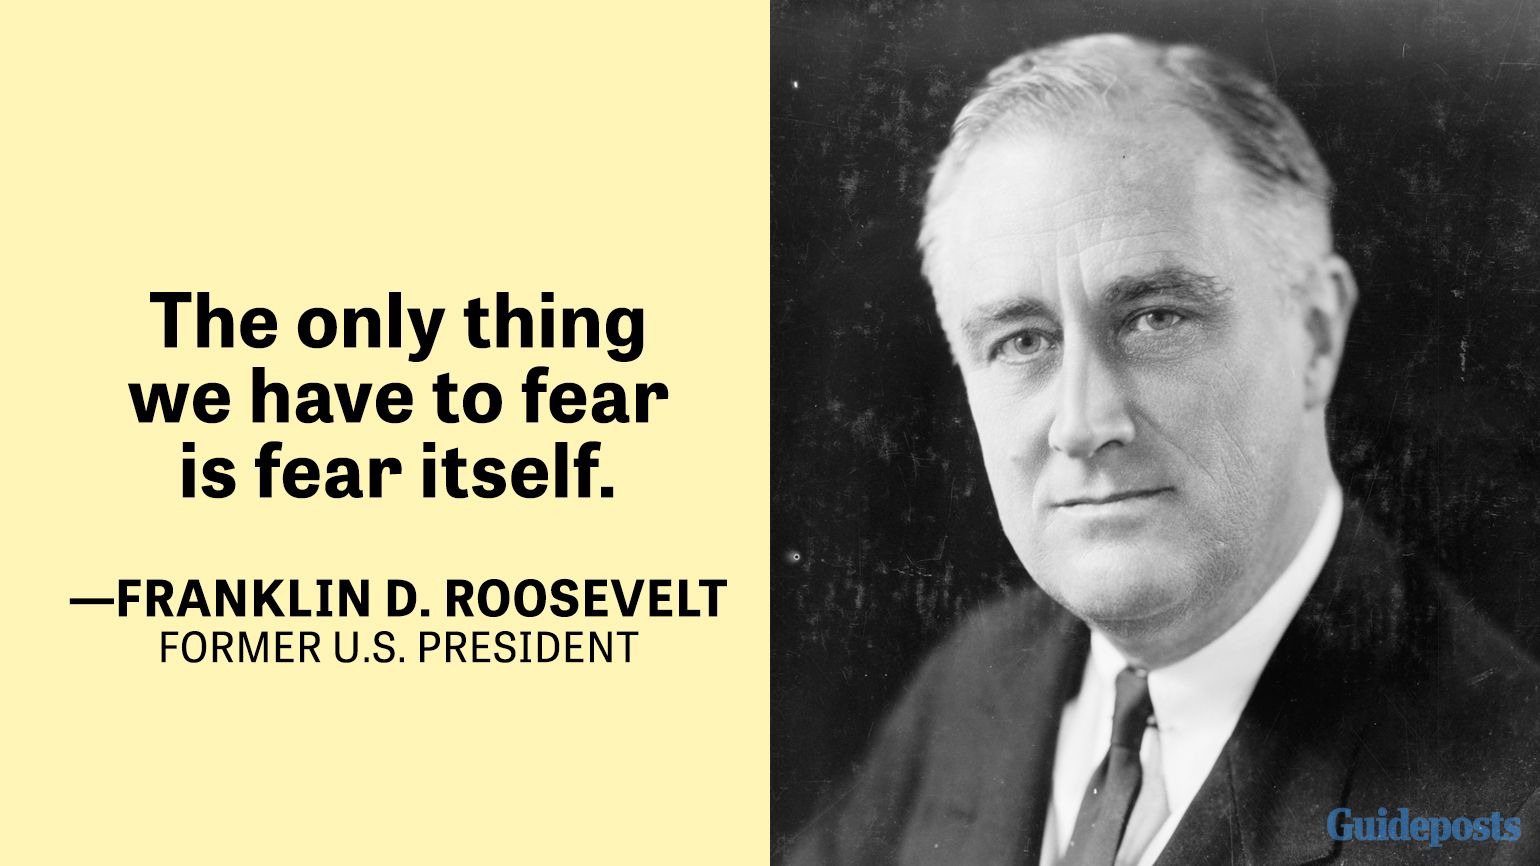 The only thing we have to fear is fear itself. —Franklin D. Roosevelt, Former U.S. President